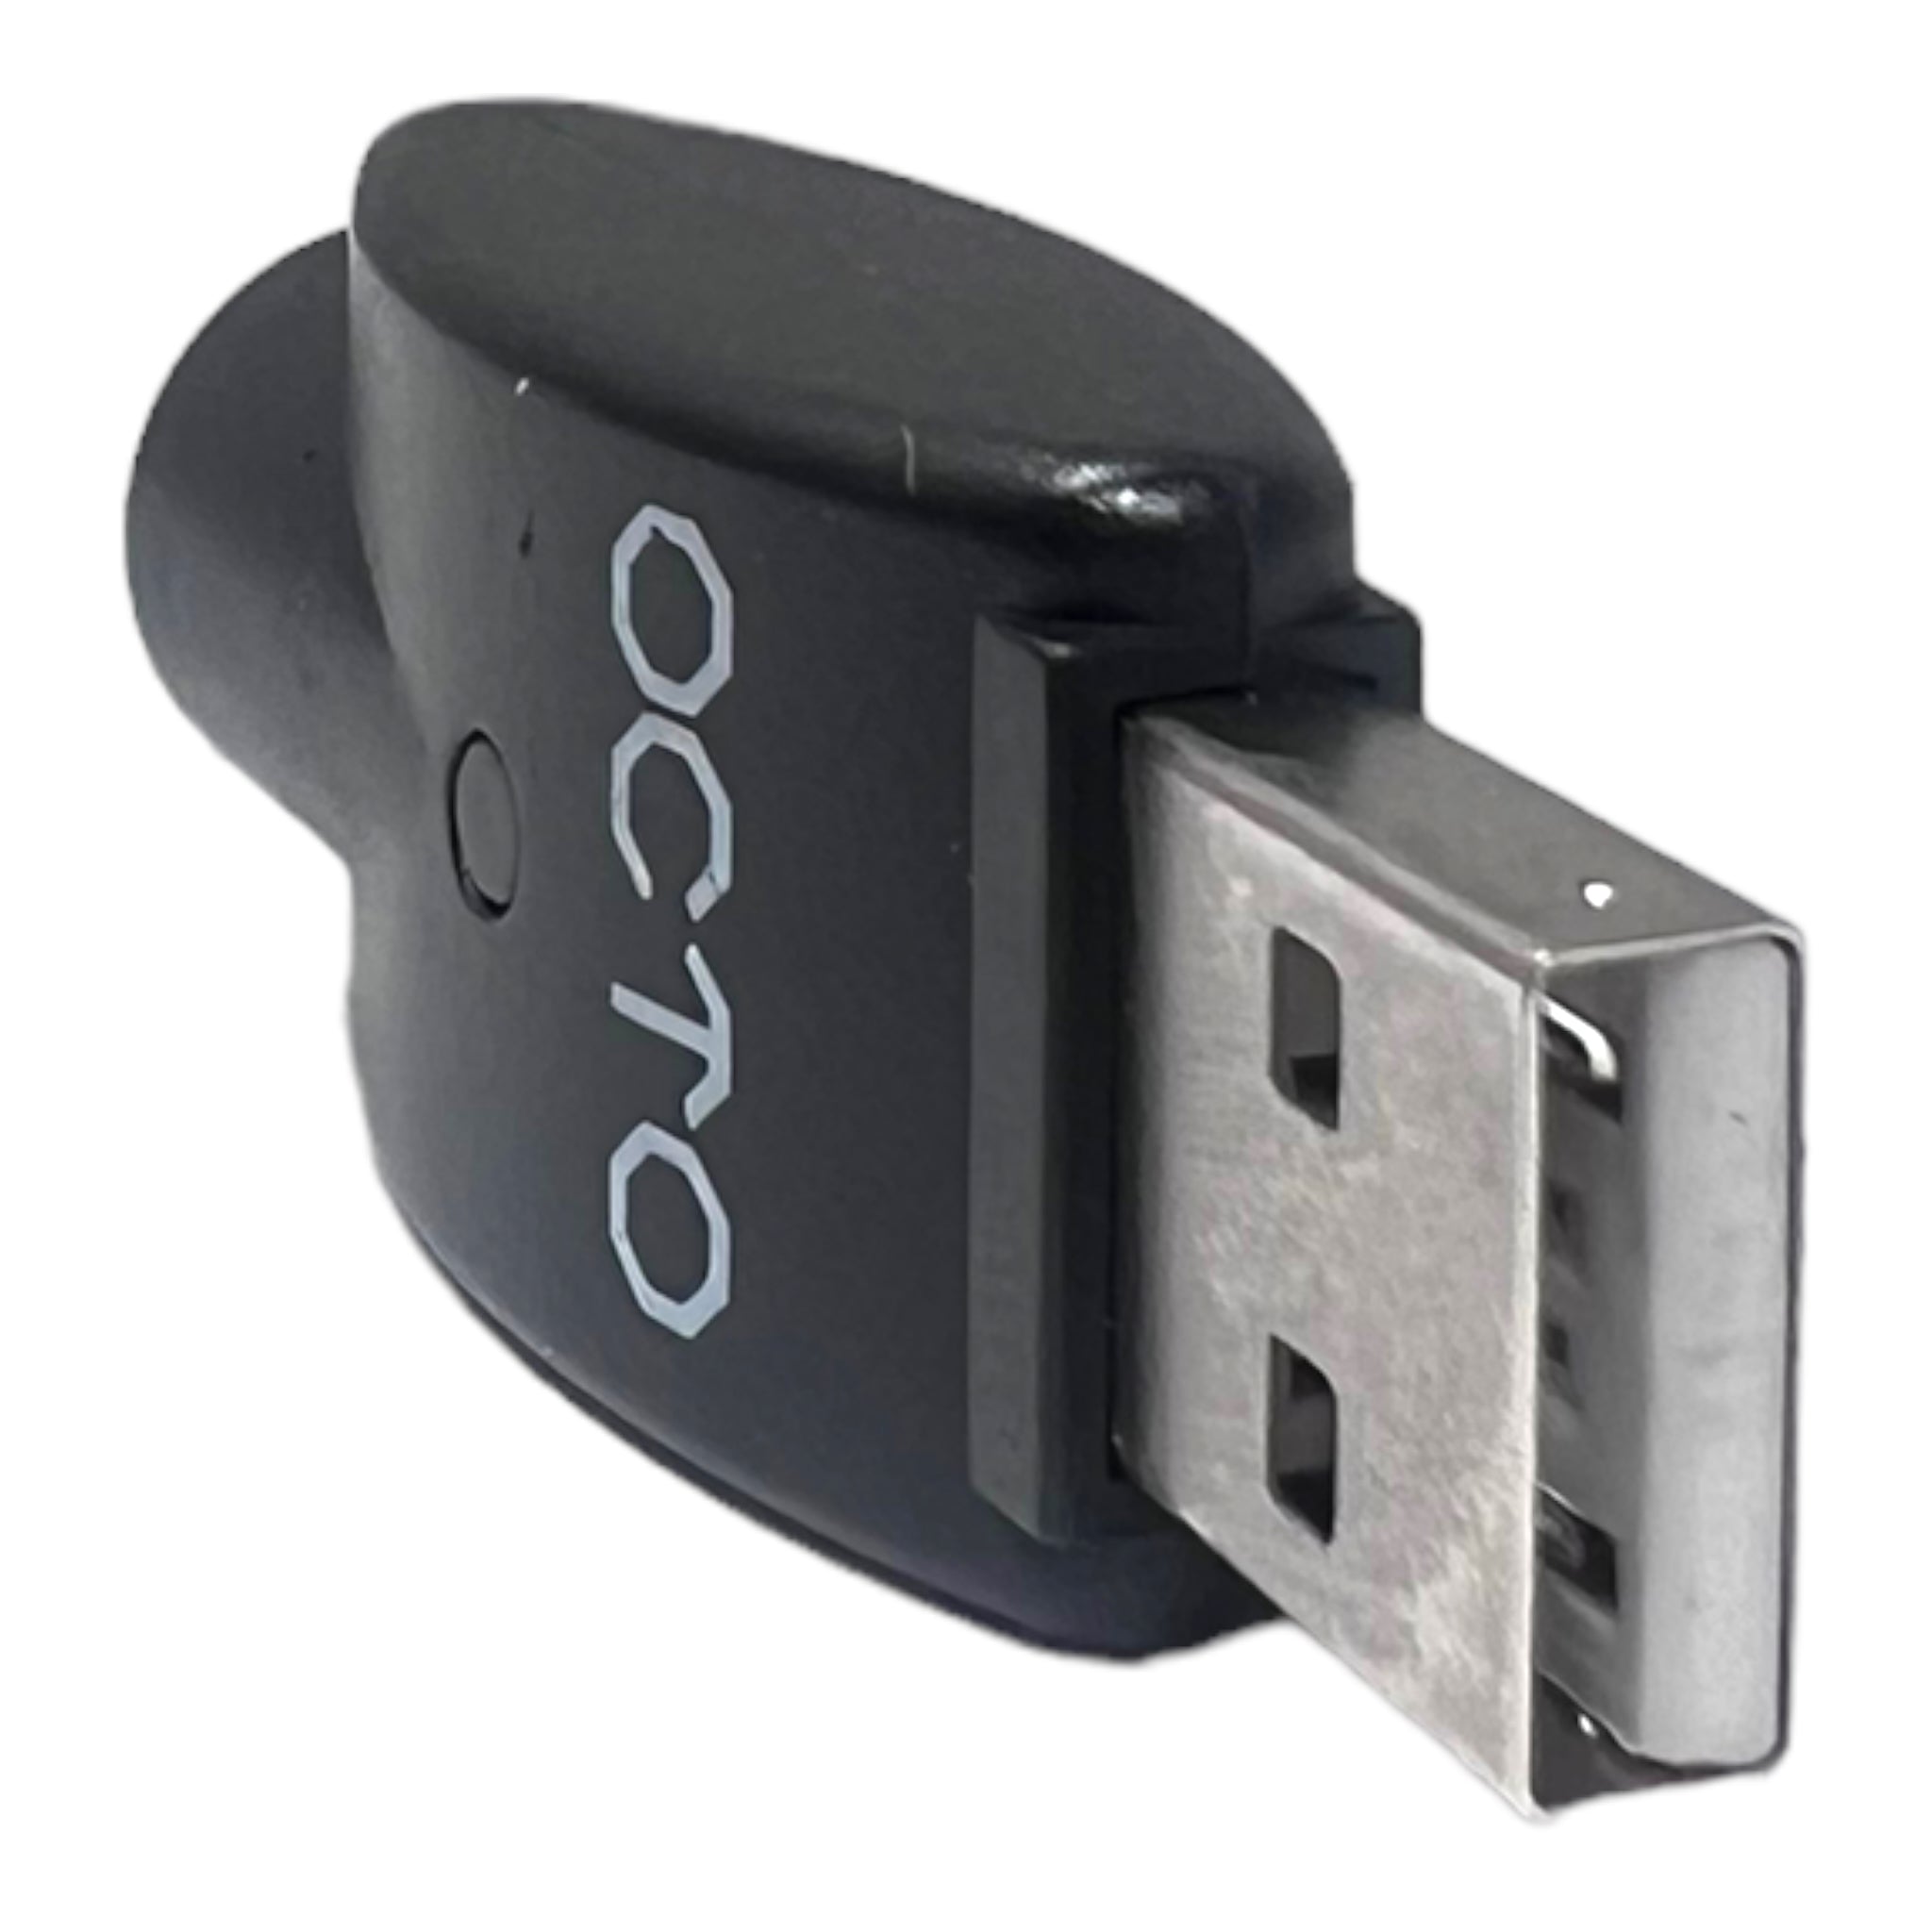 Octo USB Smart Charger